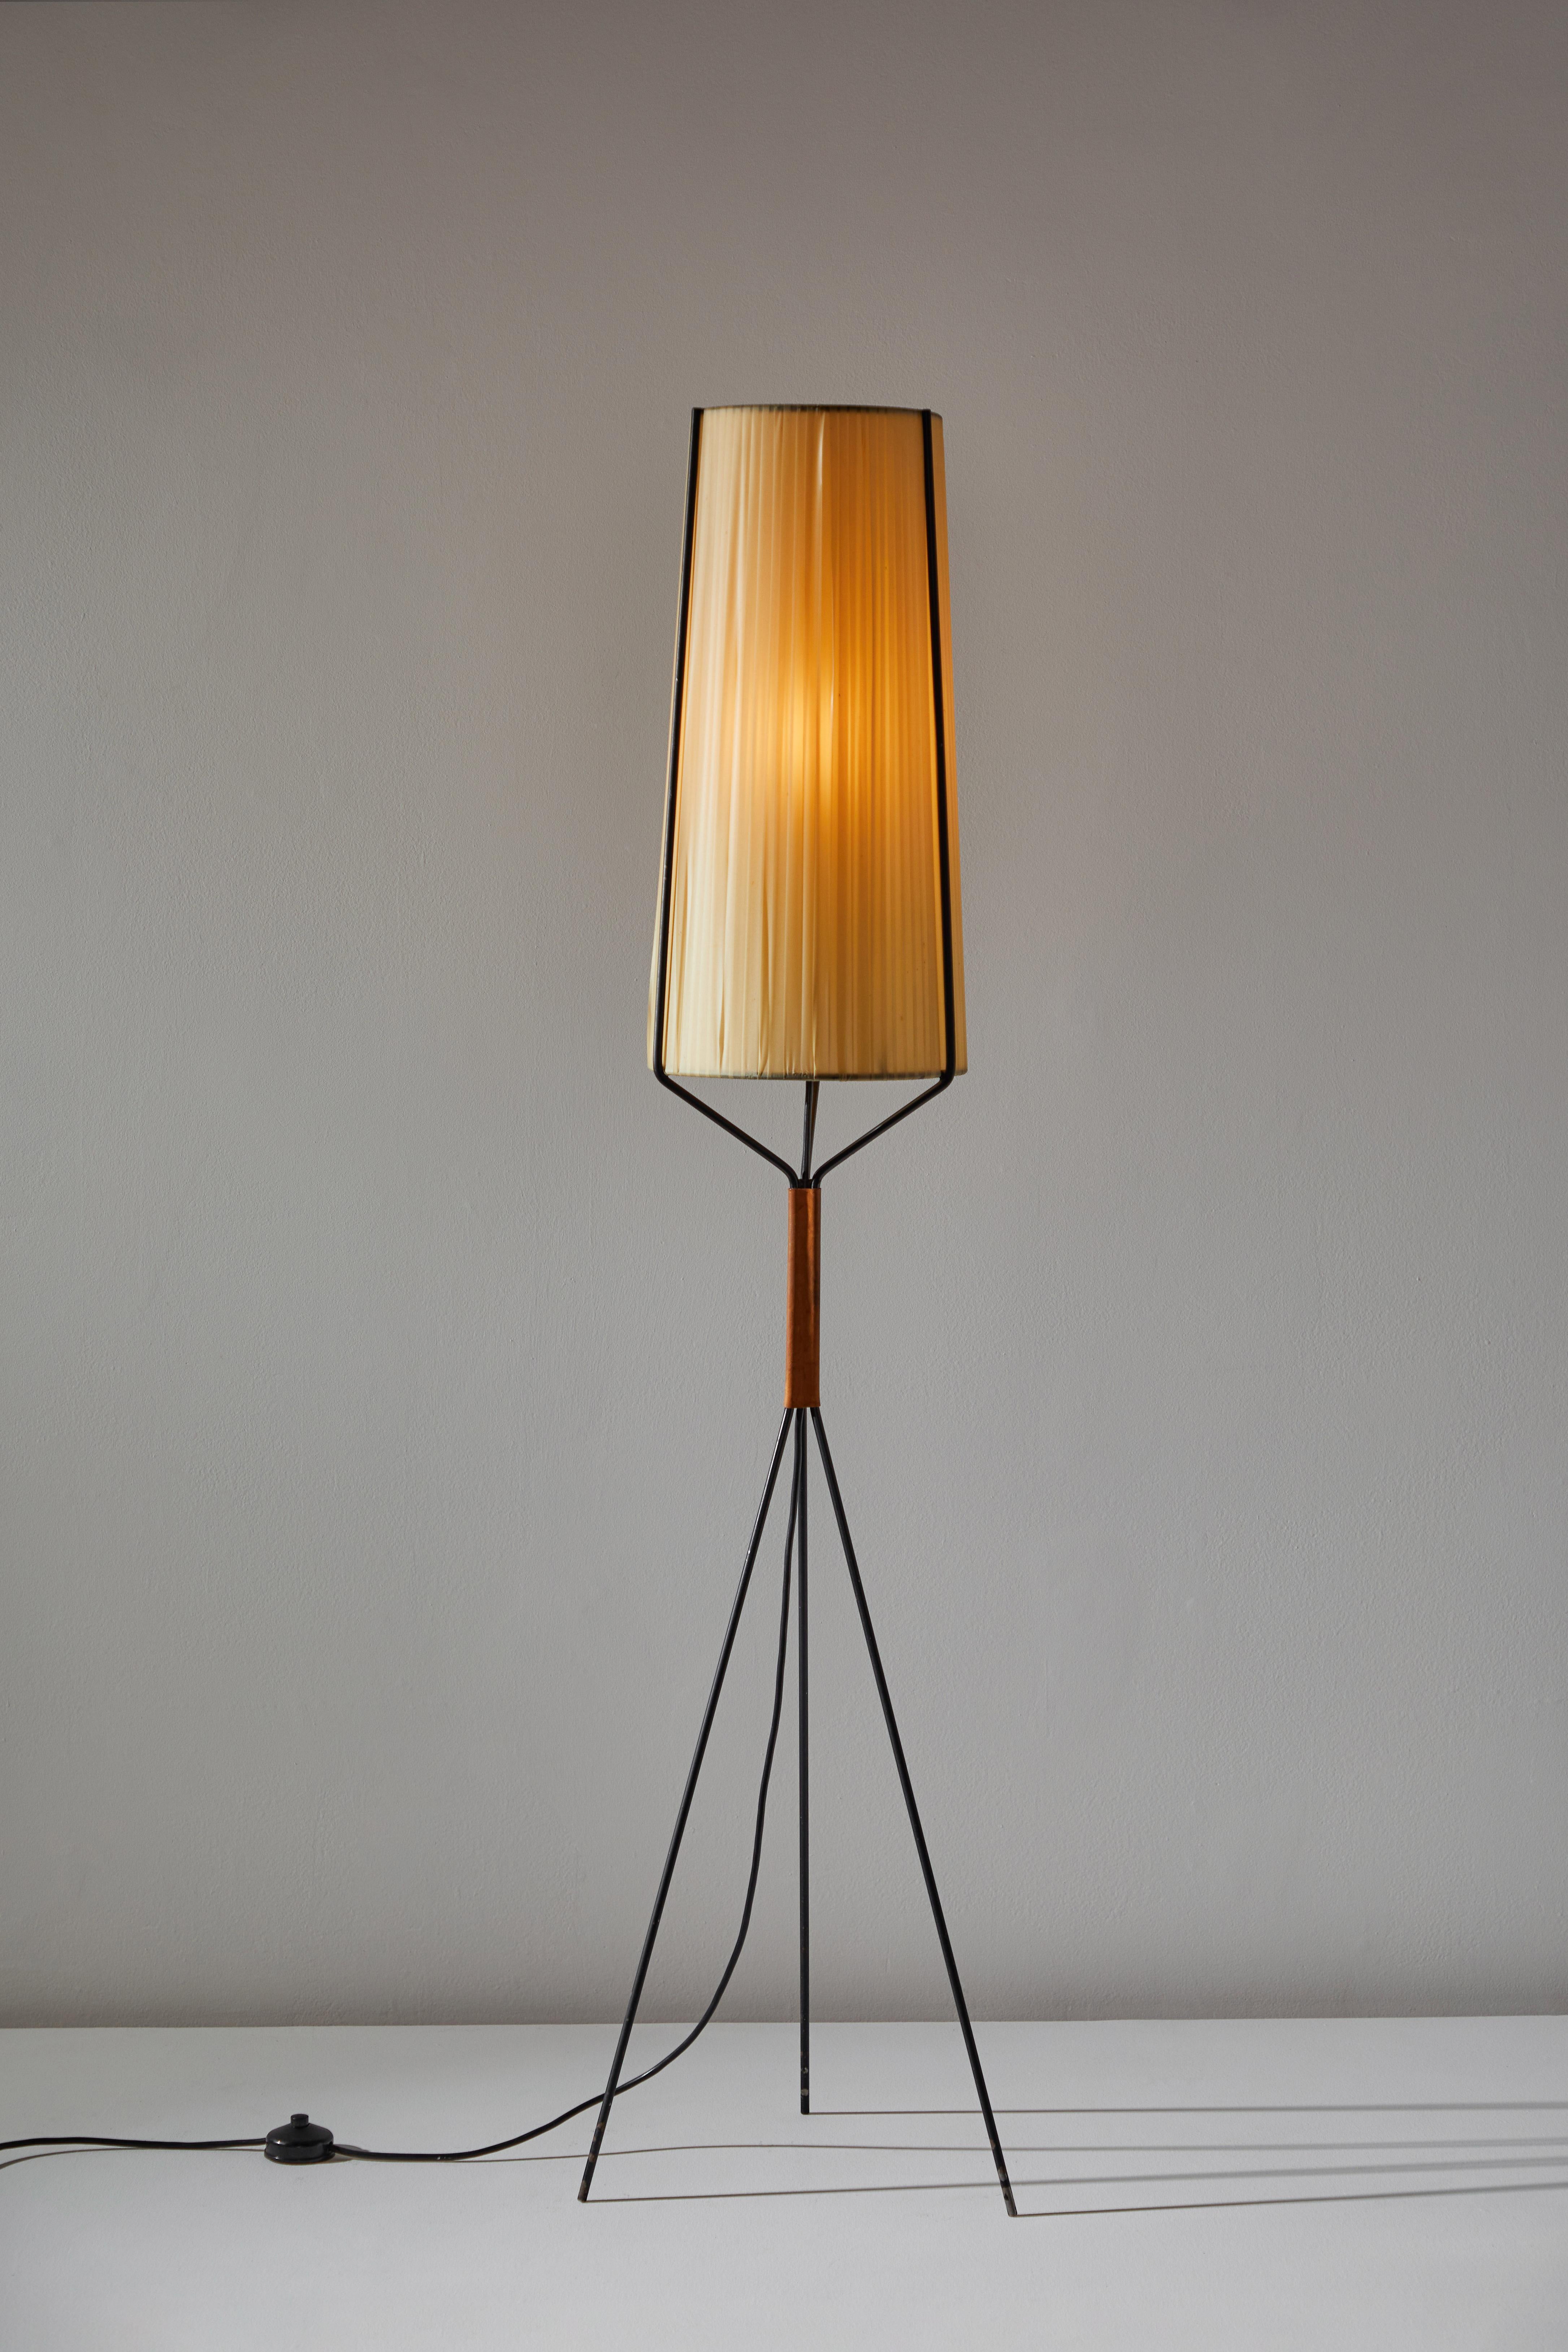 Floor lamp. Designed and manufactured in Austria, circa 1950s. Iron, leather, woven ribbon shade. Original cord with step switch. We recommend one E27 60w maximum bulb. Bulbs provided as a one time courtesy.